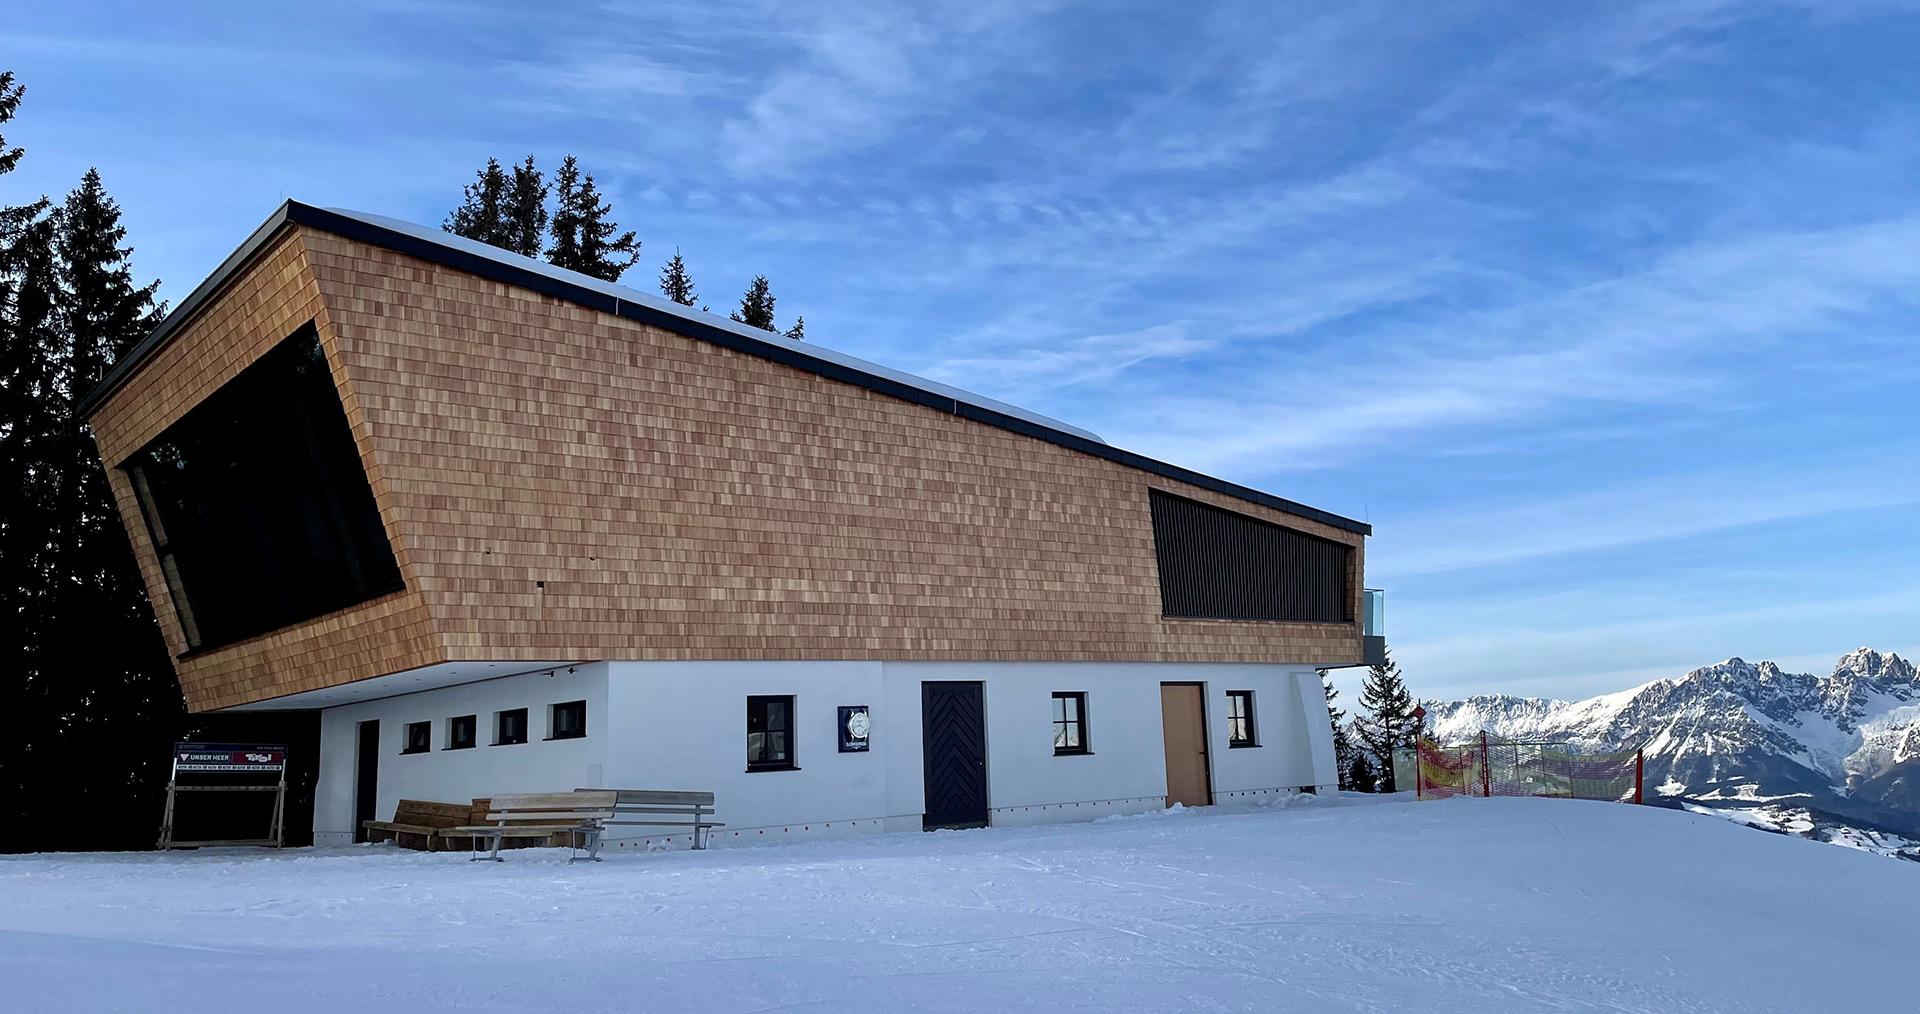 For the renovation of its Start House – the starting point of the famous Hahnenkamm downhill race – the Kitzbühel Ski Club used products from Geberit.